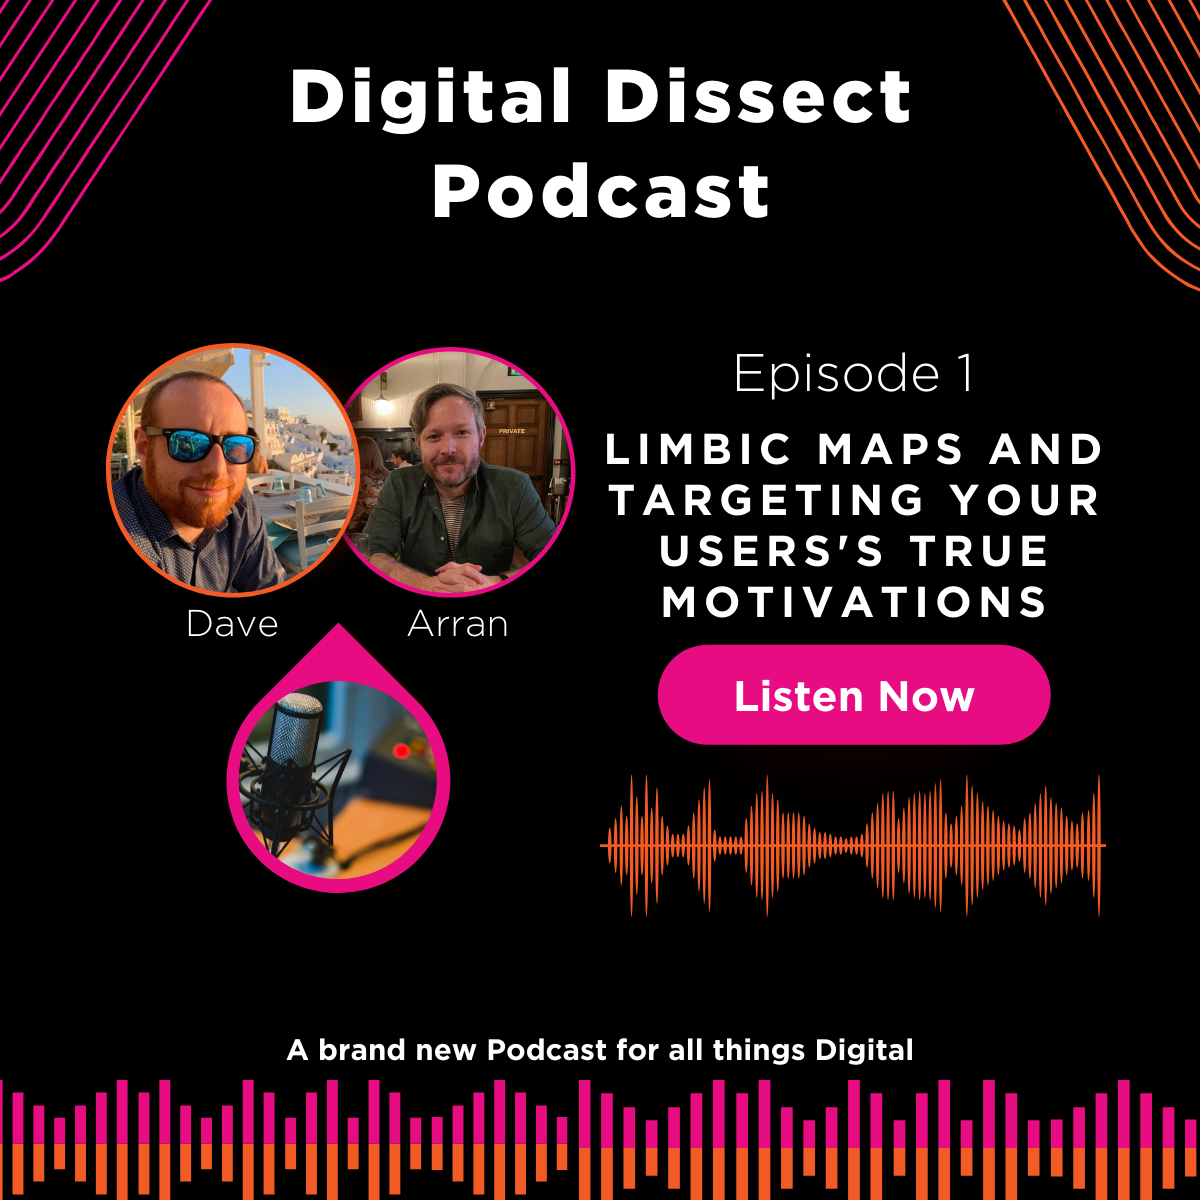 Episode 1 - Targeting your users' true motivations using a limbic map